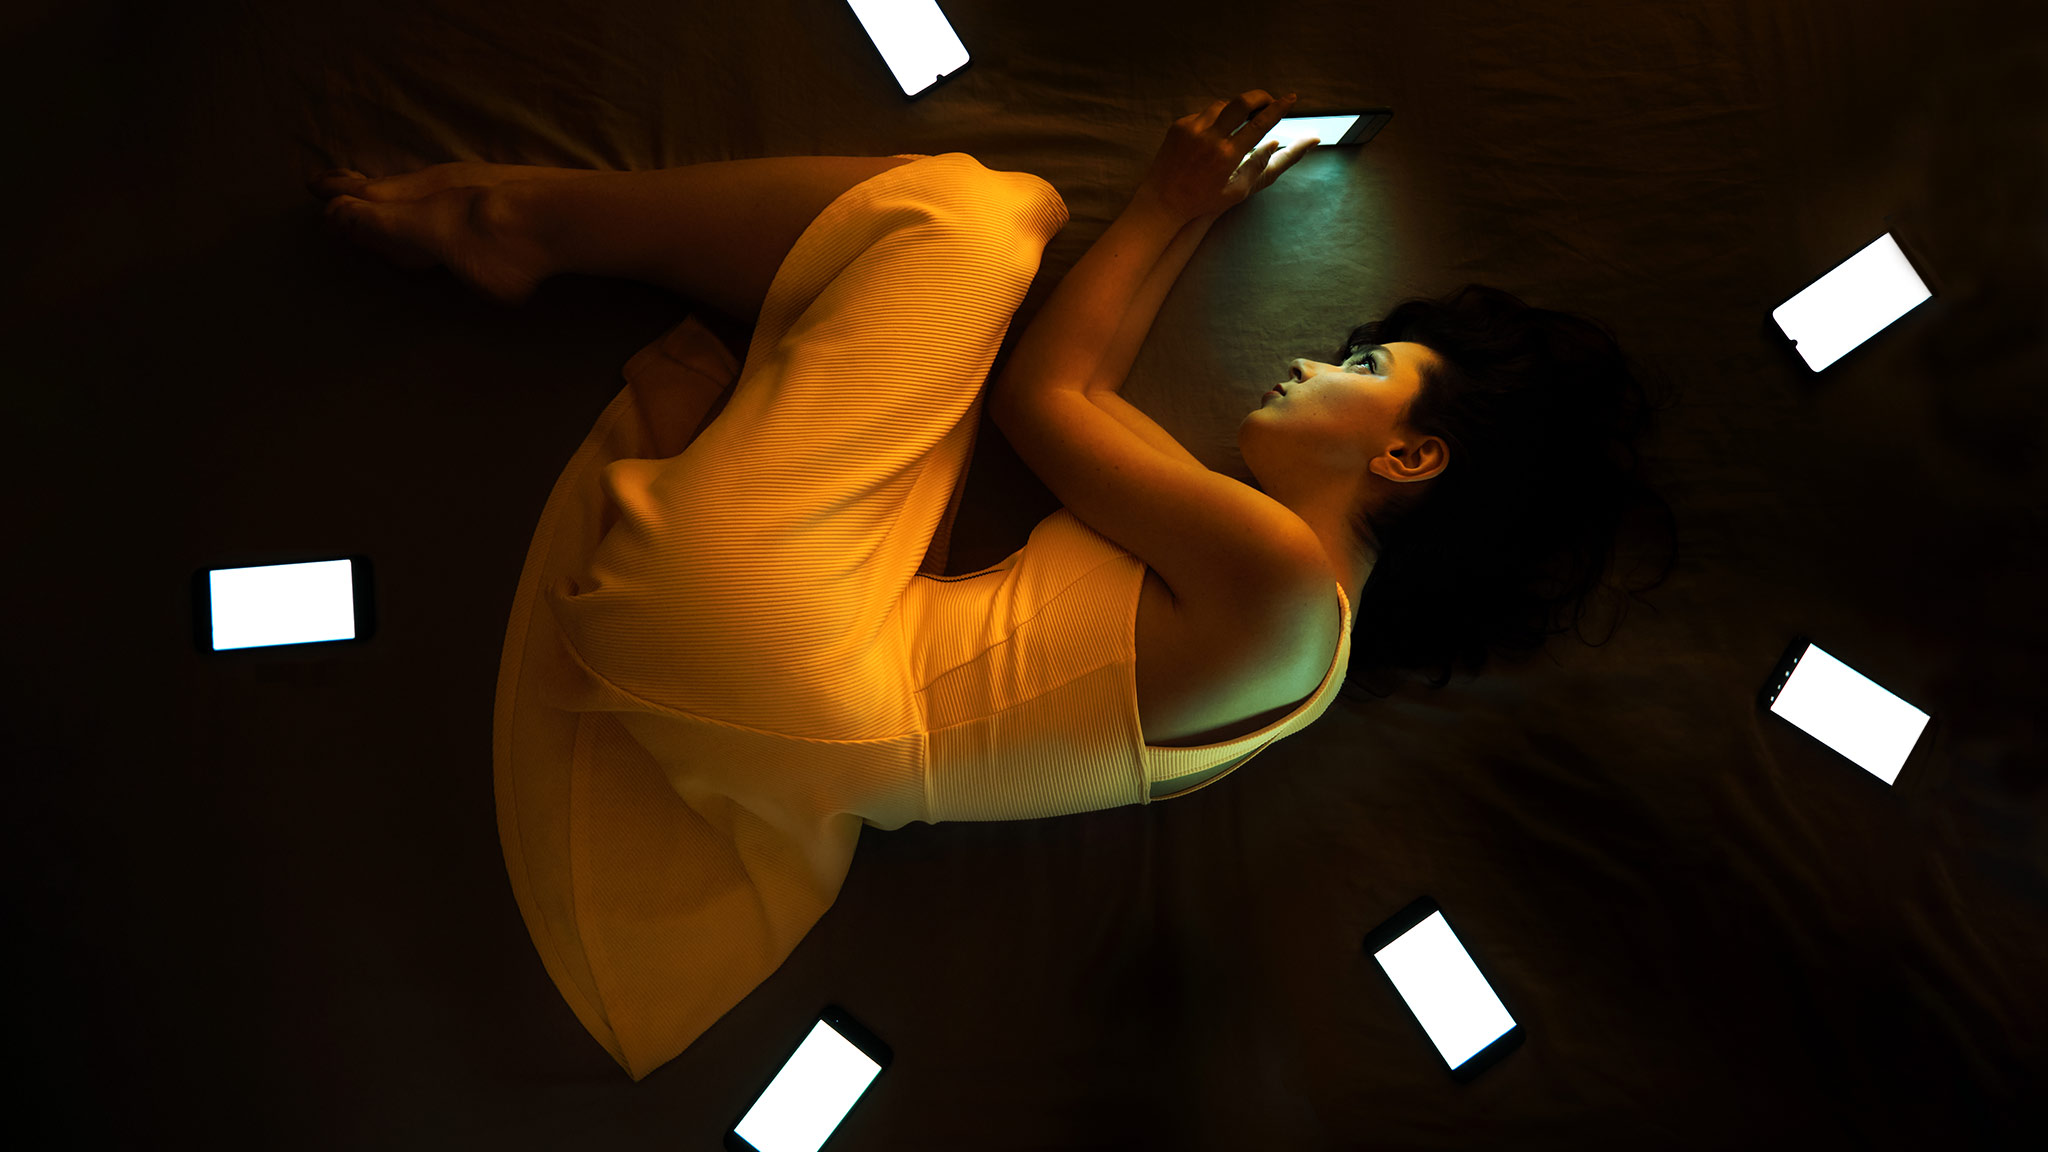 Aerial Photograph Of Woman Laying On Bed Scrolling Through Her Phone, Surrounded By Other Lit Phone Screens In Every Direction